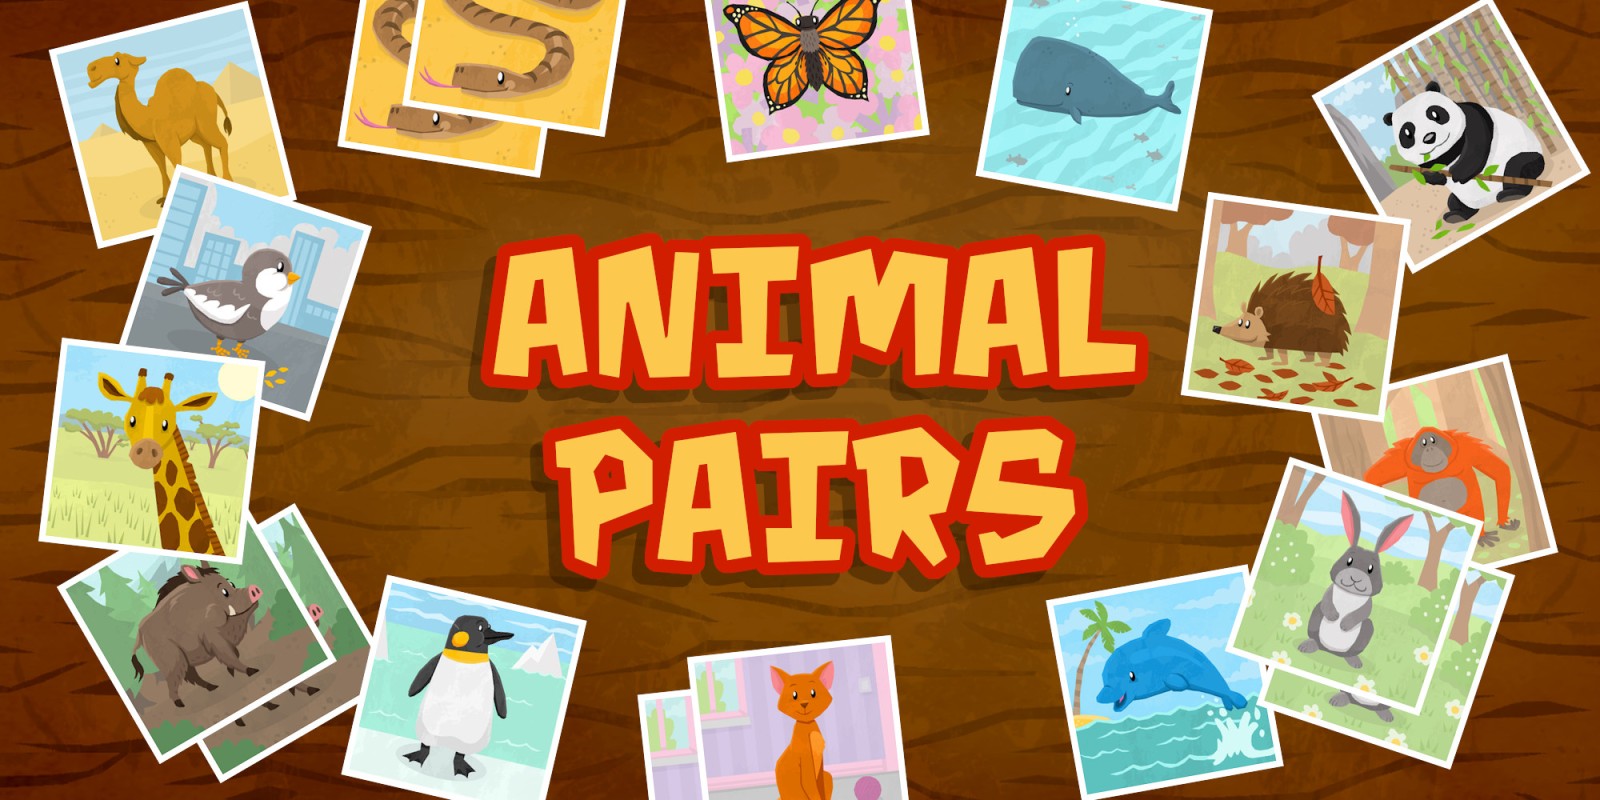 Animal Pairs - Matching & Concentration Game for Toddlers & Kids